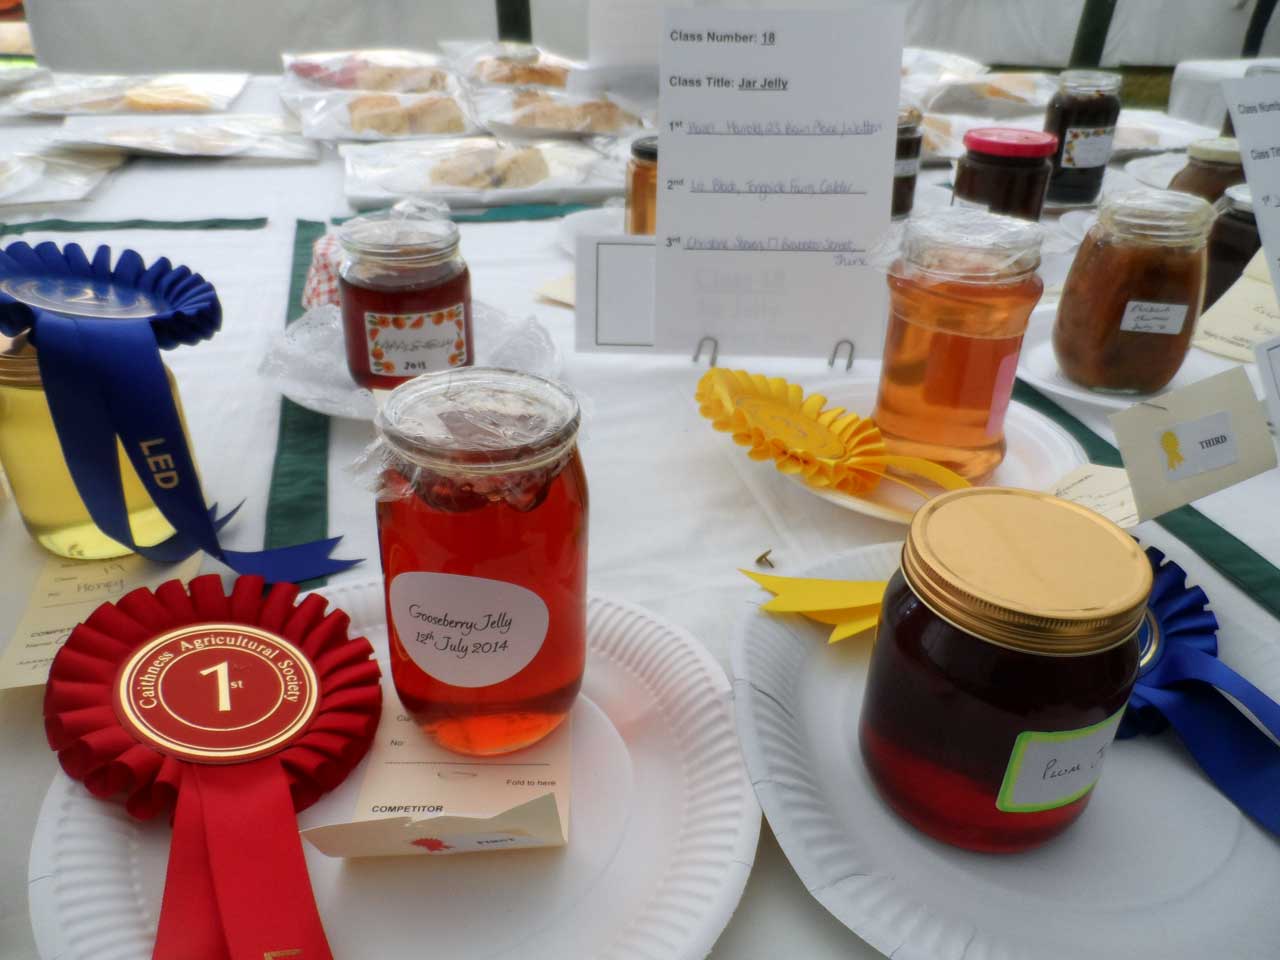 Photo: Caithness County Show 2014 - Friday Evening Preview